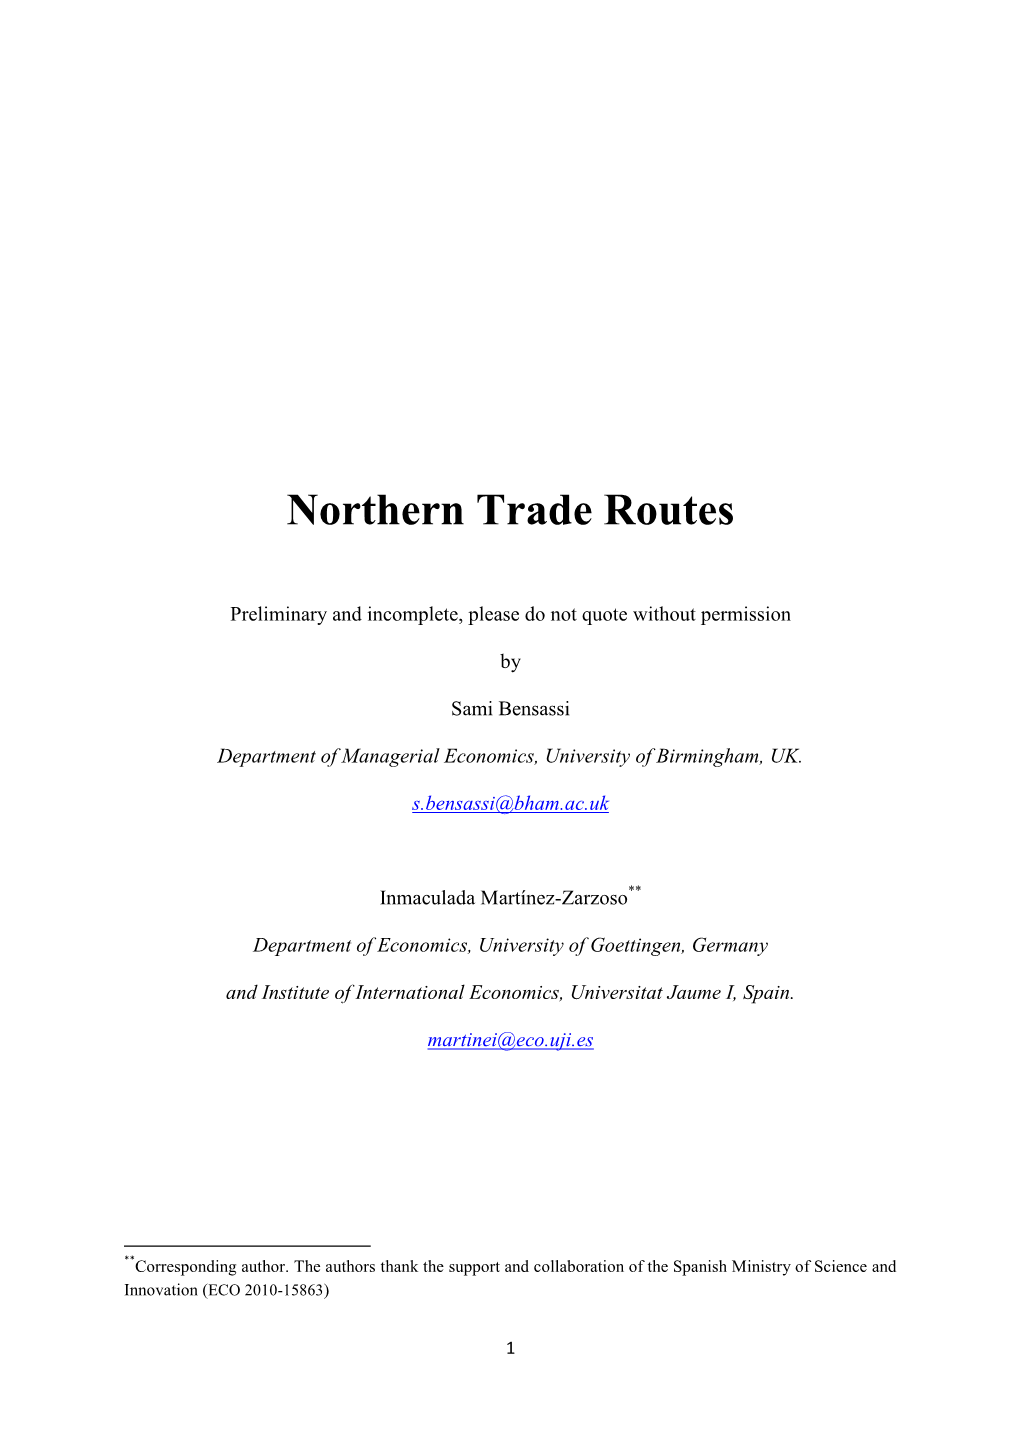 Northern Sea-Route: What Effects on Trade?